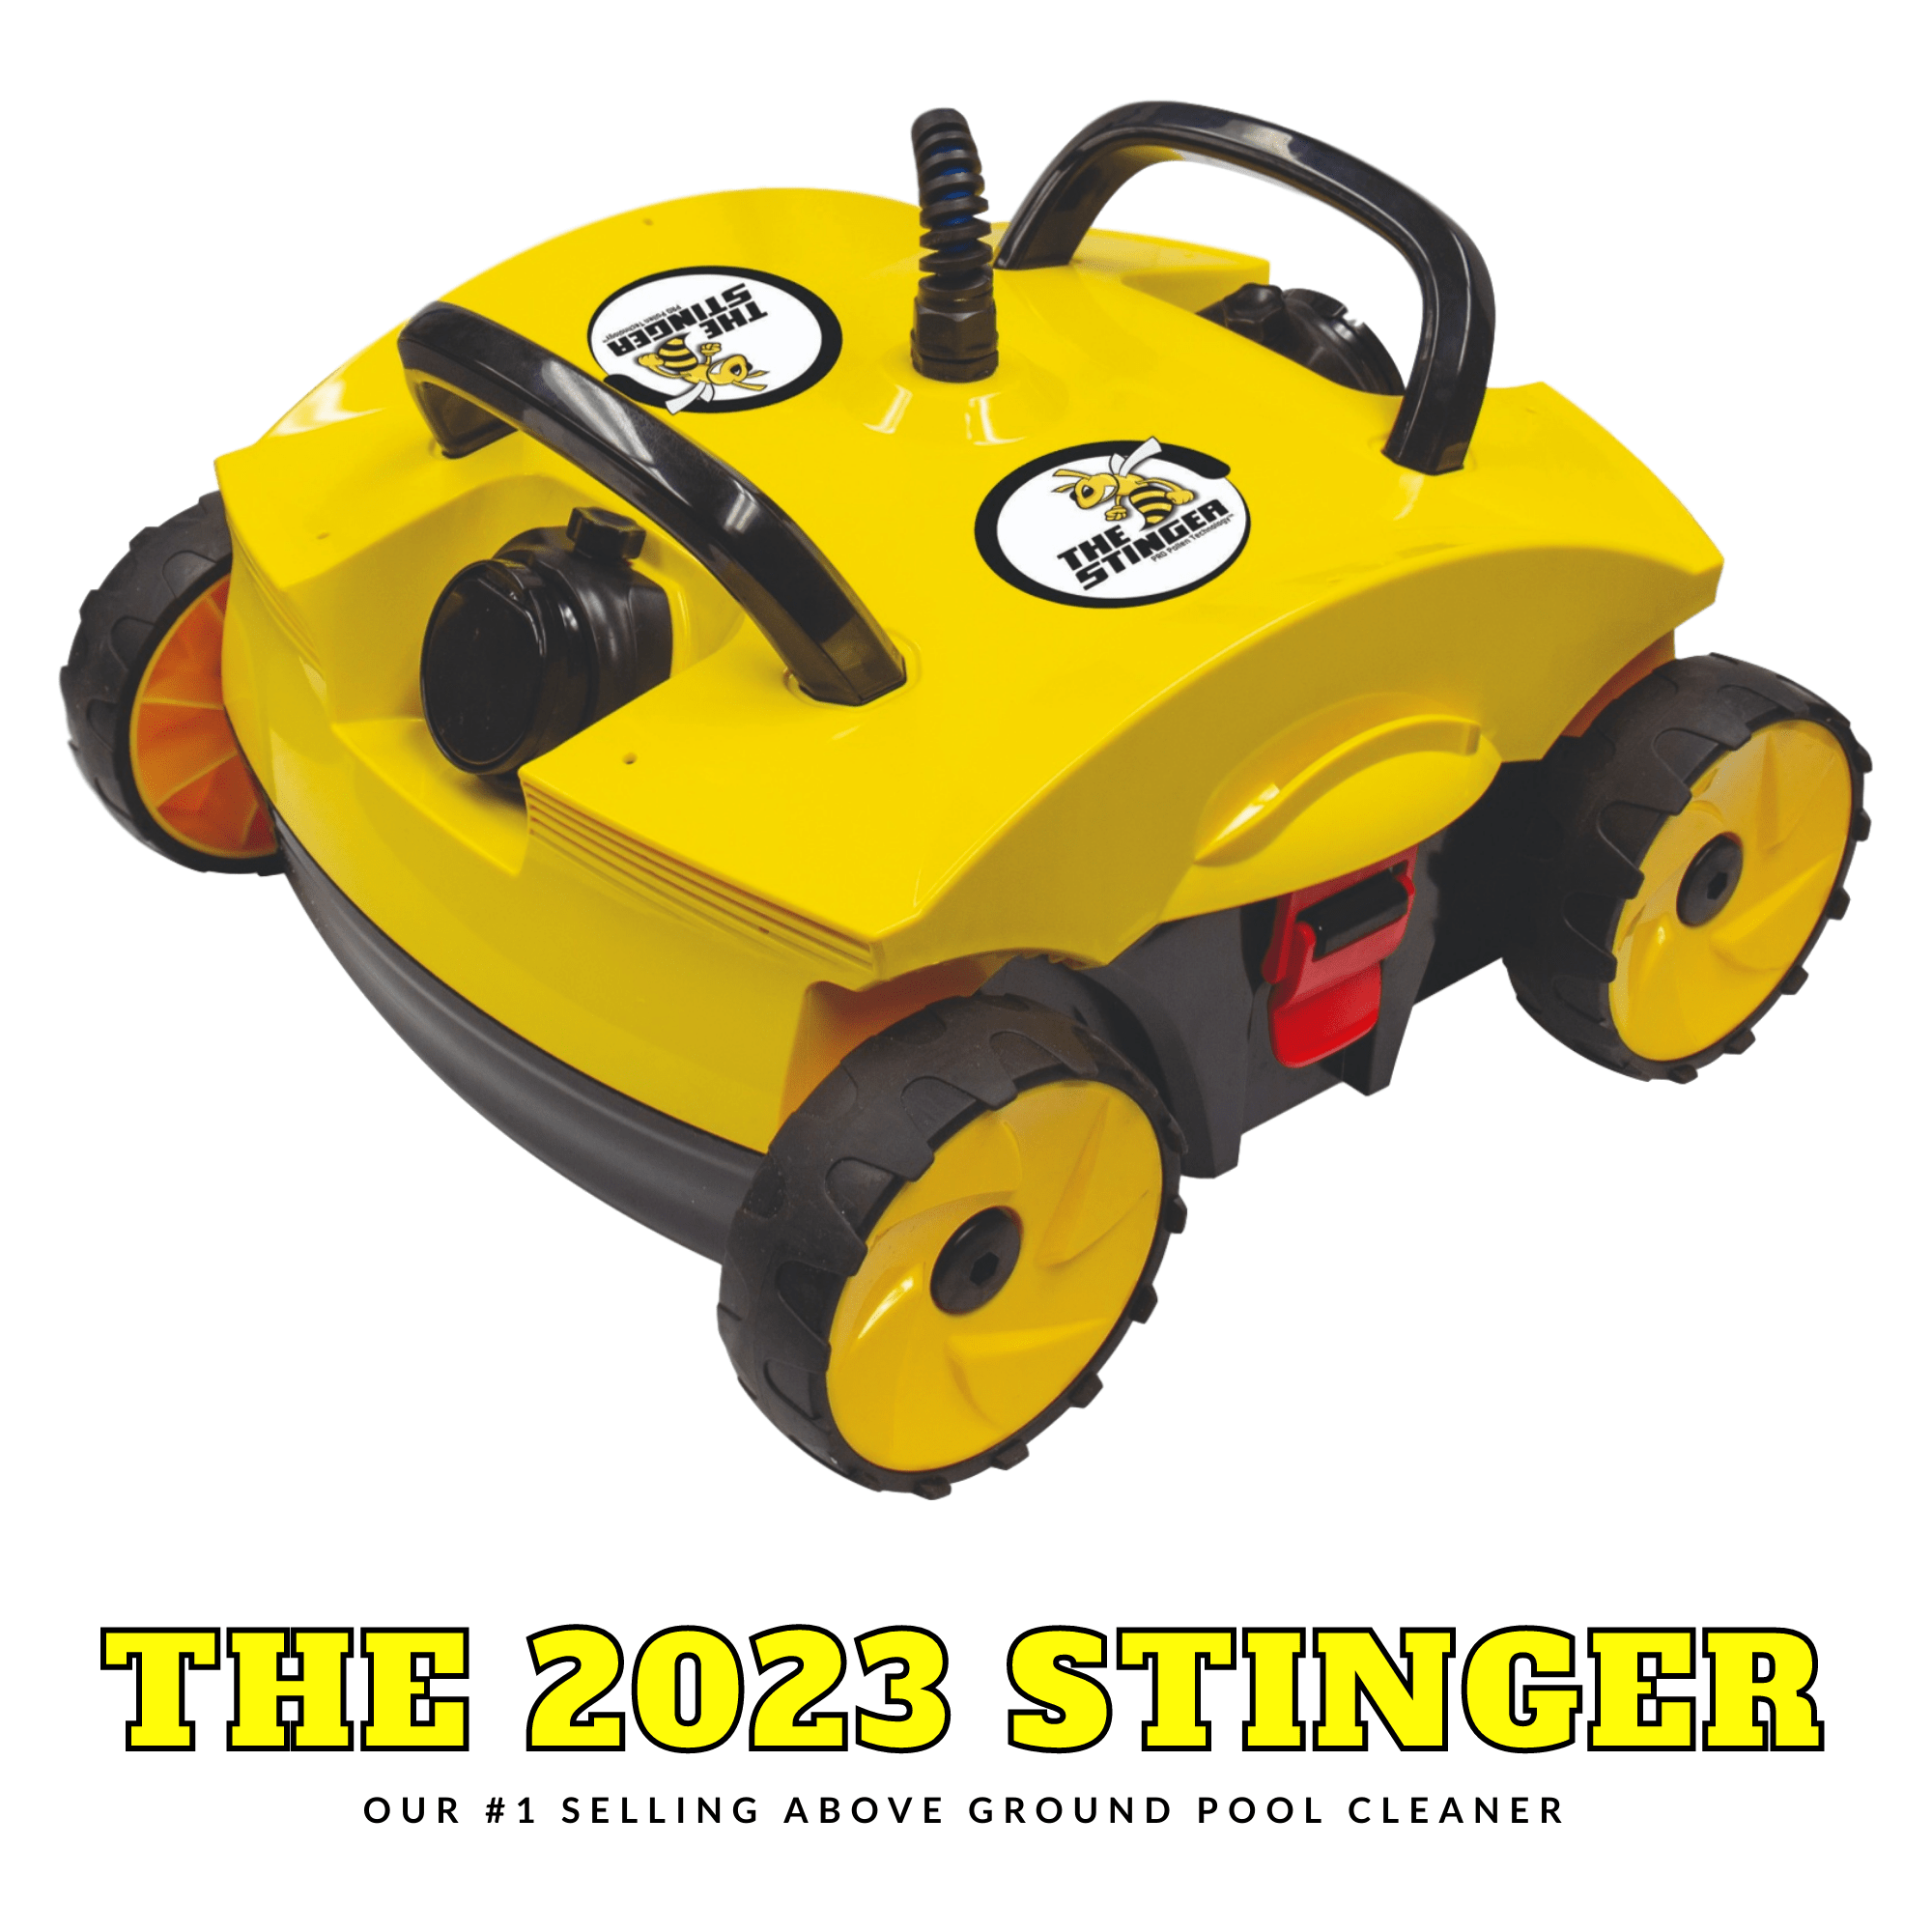 Check Out The Stinger Cleaner